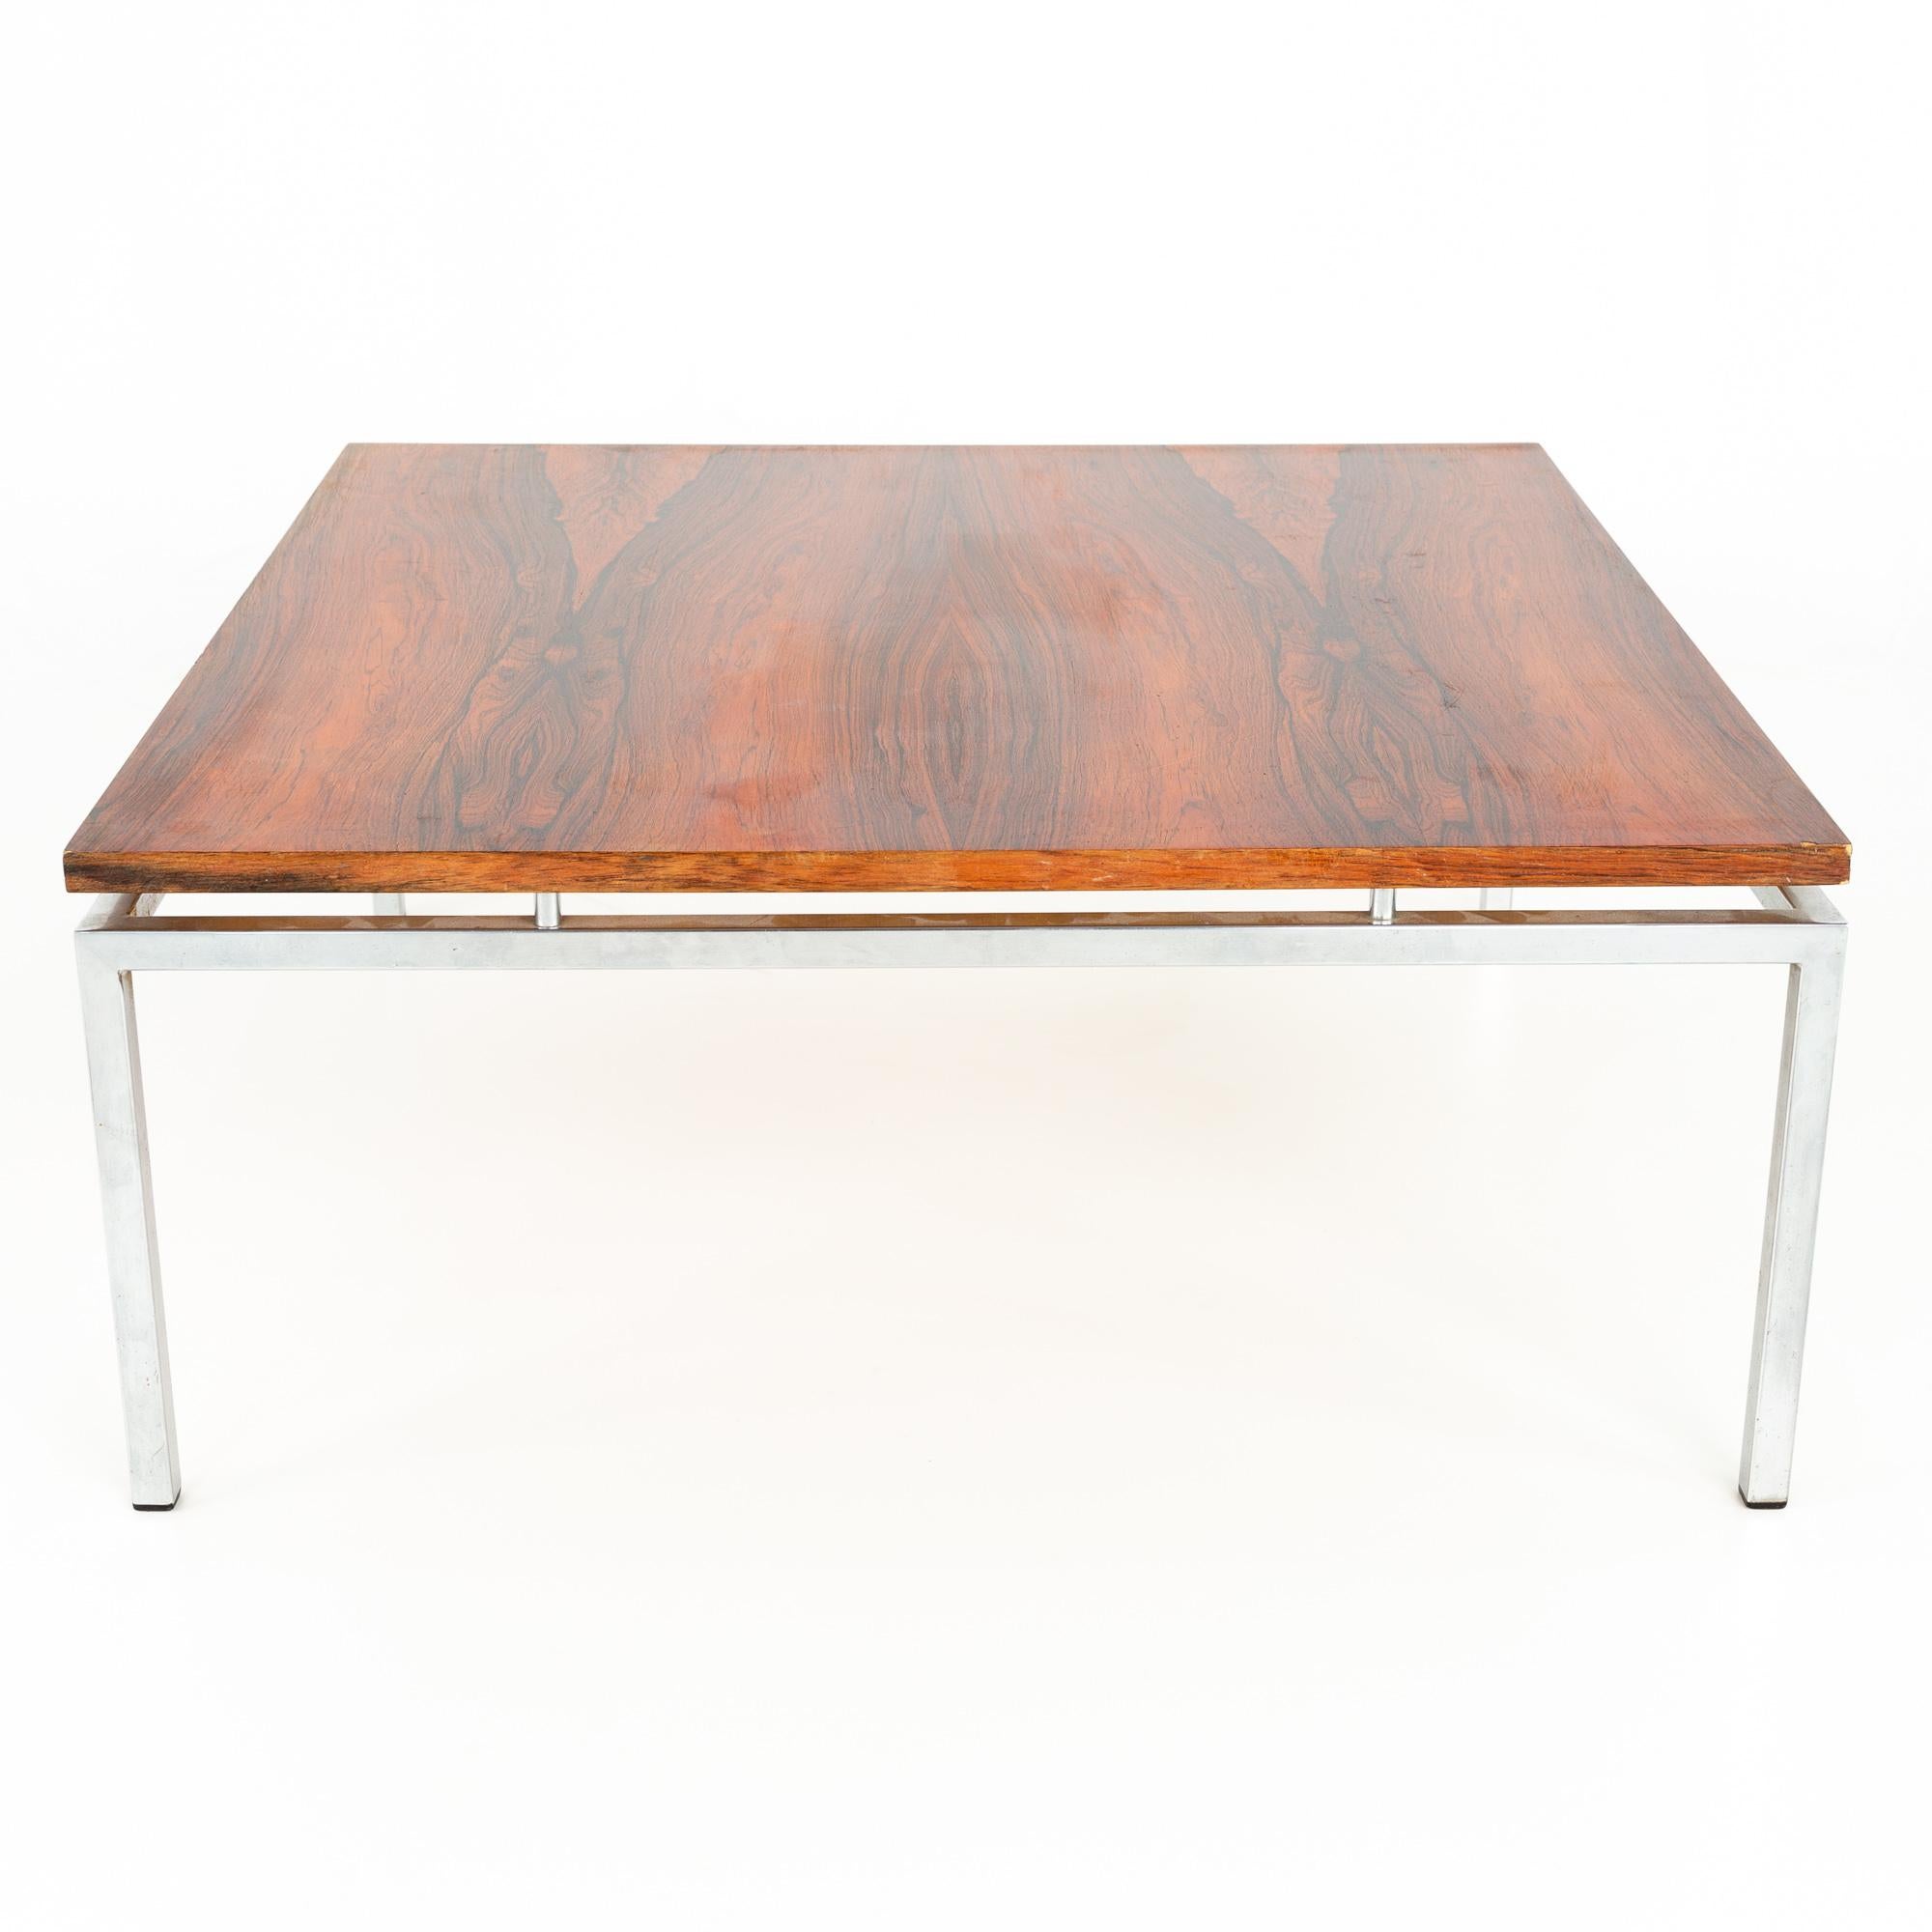 Milo Baughman style Mid Century chrome and rosewood square coffee table
Measures: 31.5 wide x 31.5 deep x 13.5 inches high

All pieces of furniture can be had in what we call restored vintage condition. That means the piece is restored upon purchase